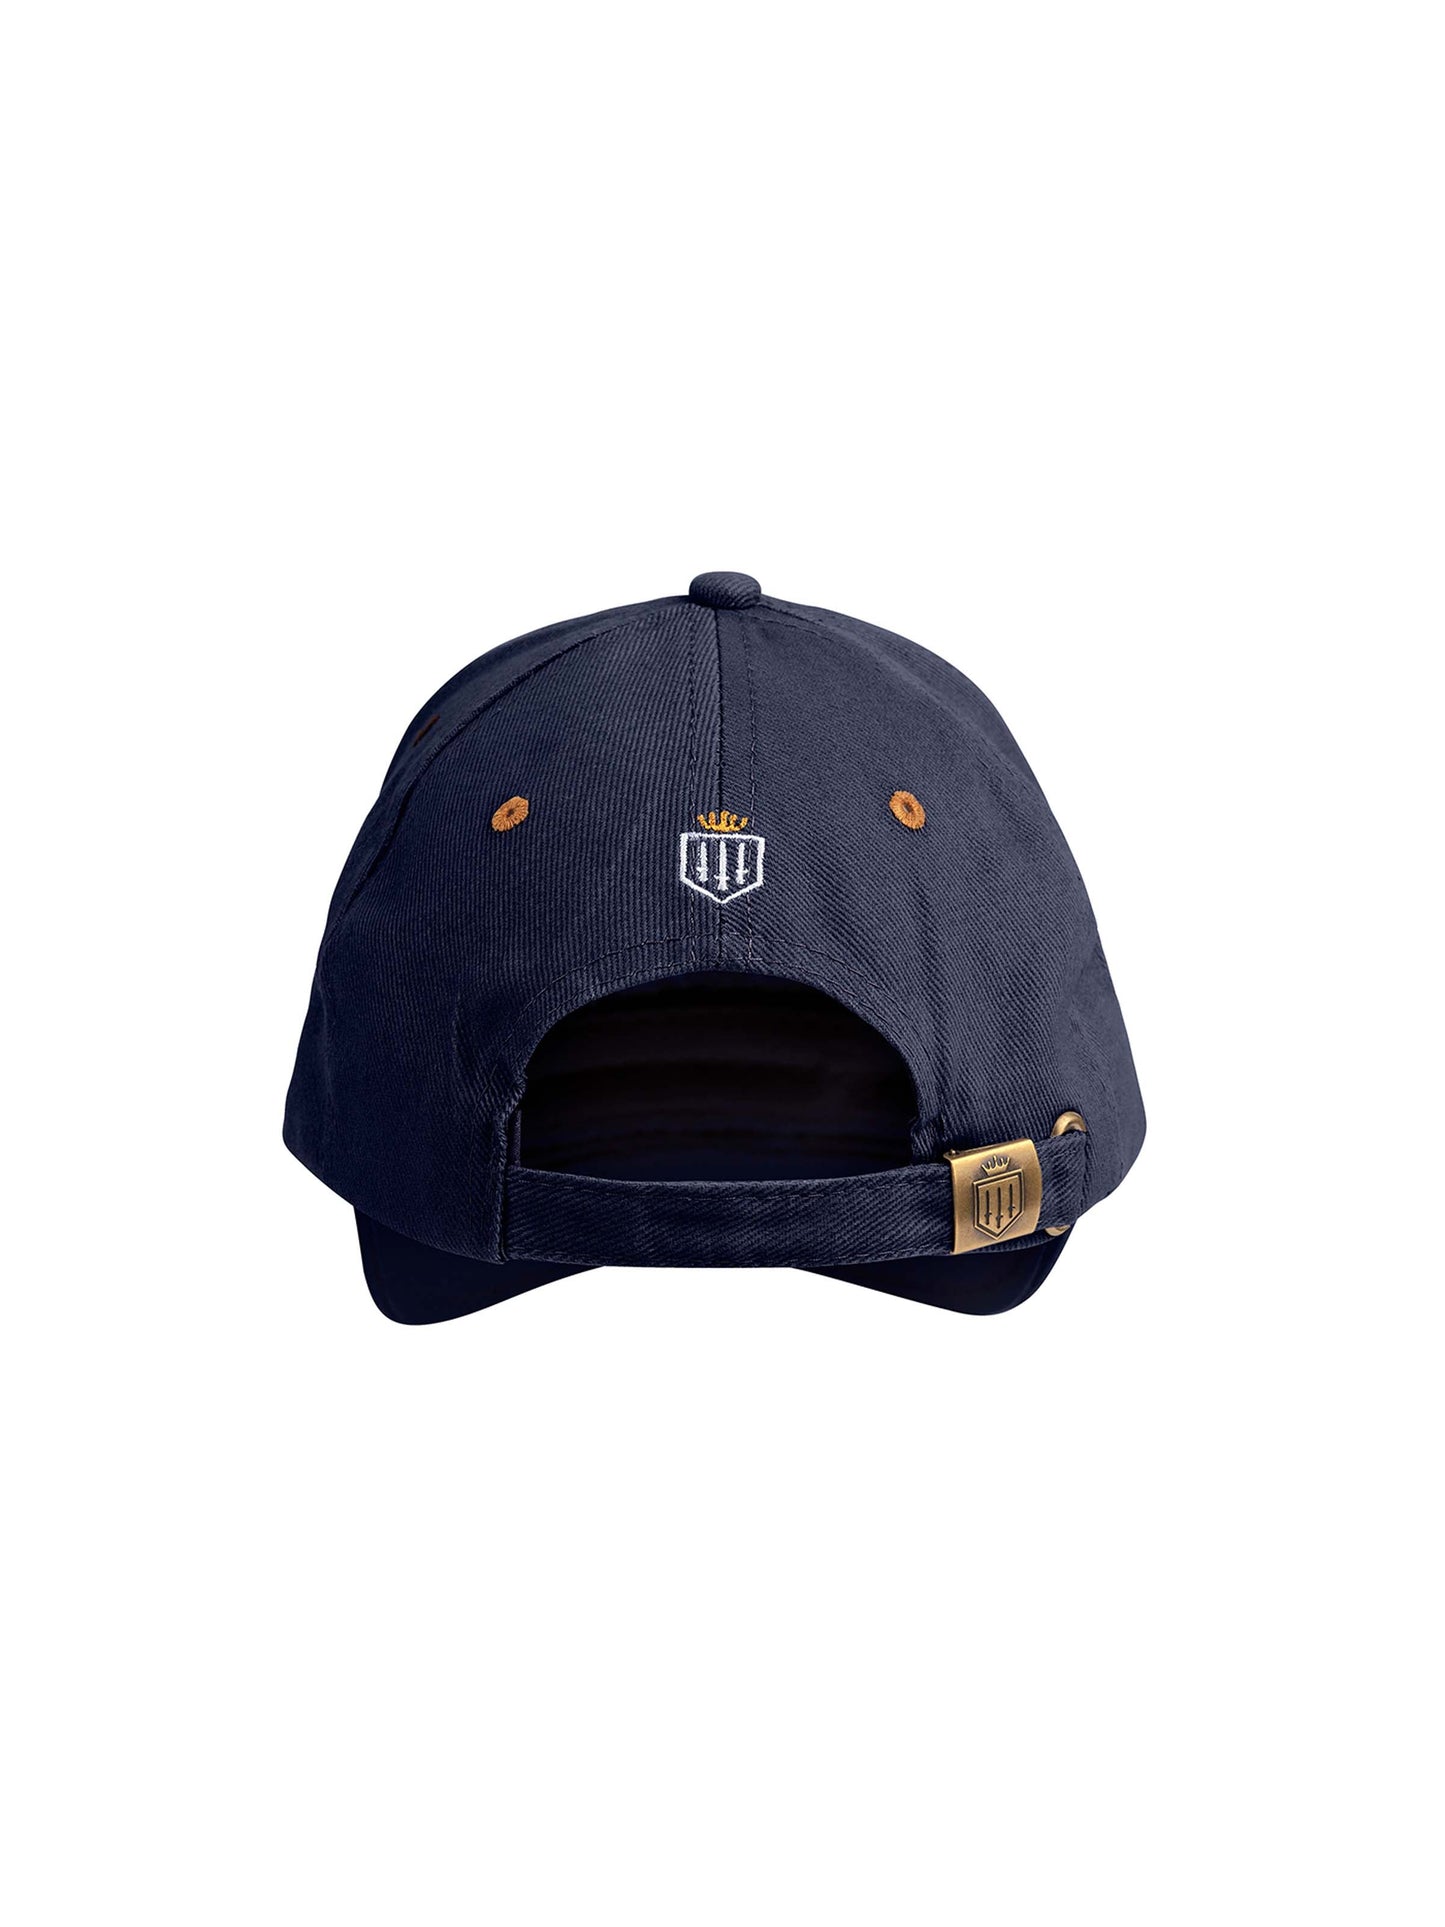 The Signature Hat - Navy Blue